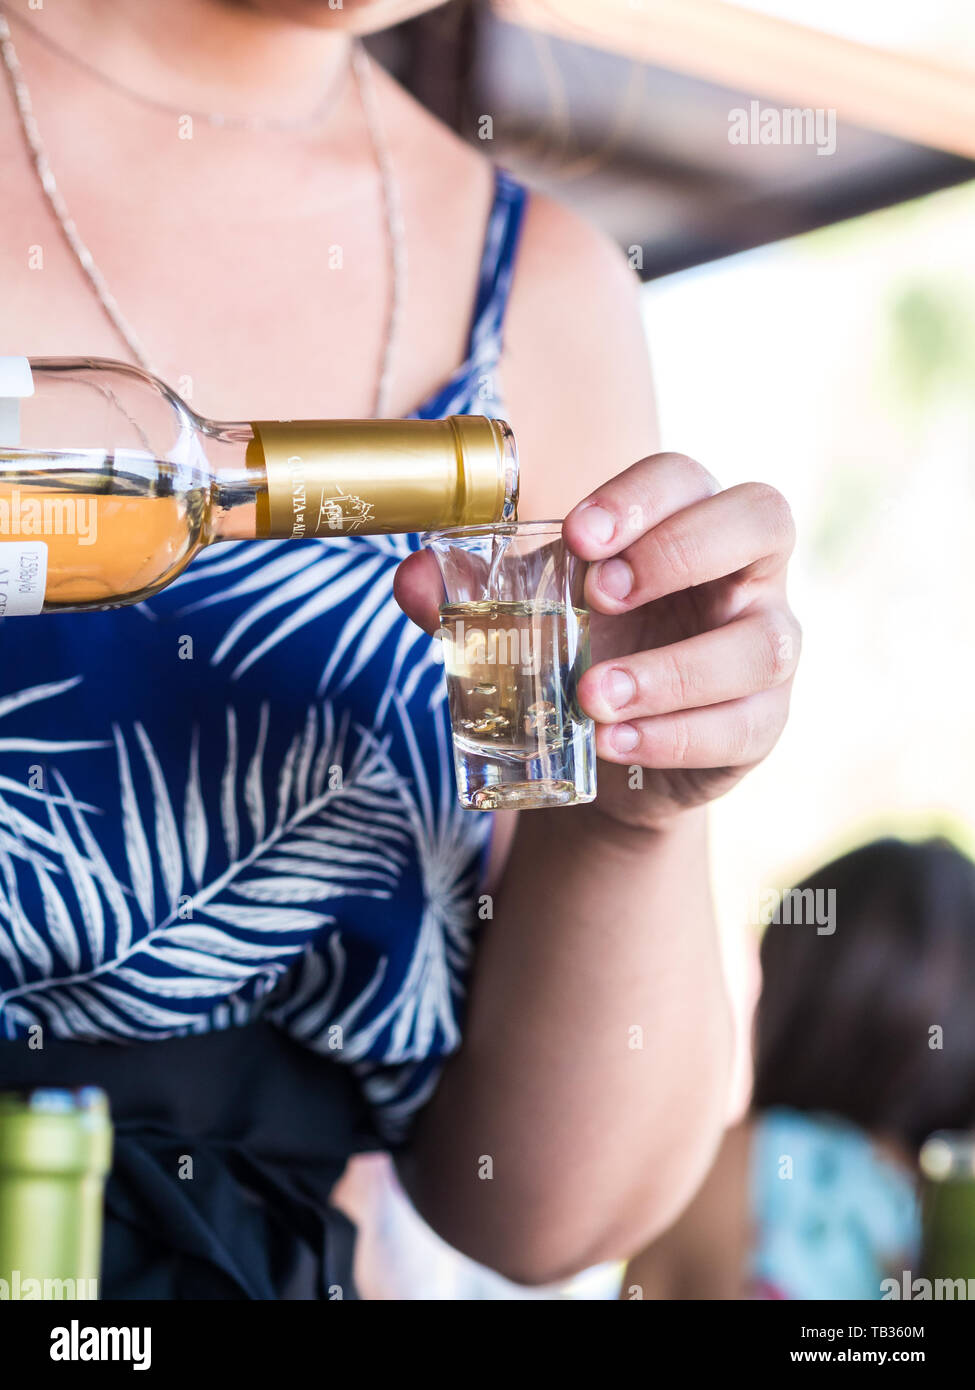 SETUBAL, PORTUGAL – AUGUST 25, 2018: Young woman presenting pouring moscatel wine during wine tasting in Quinta de Alcube in Setubal region, Portugal. Stock Photo